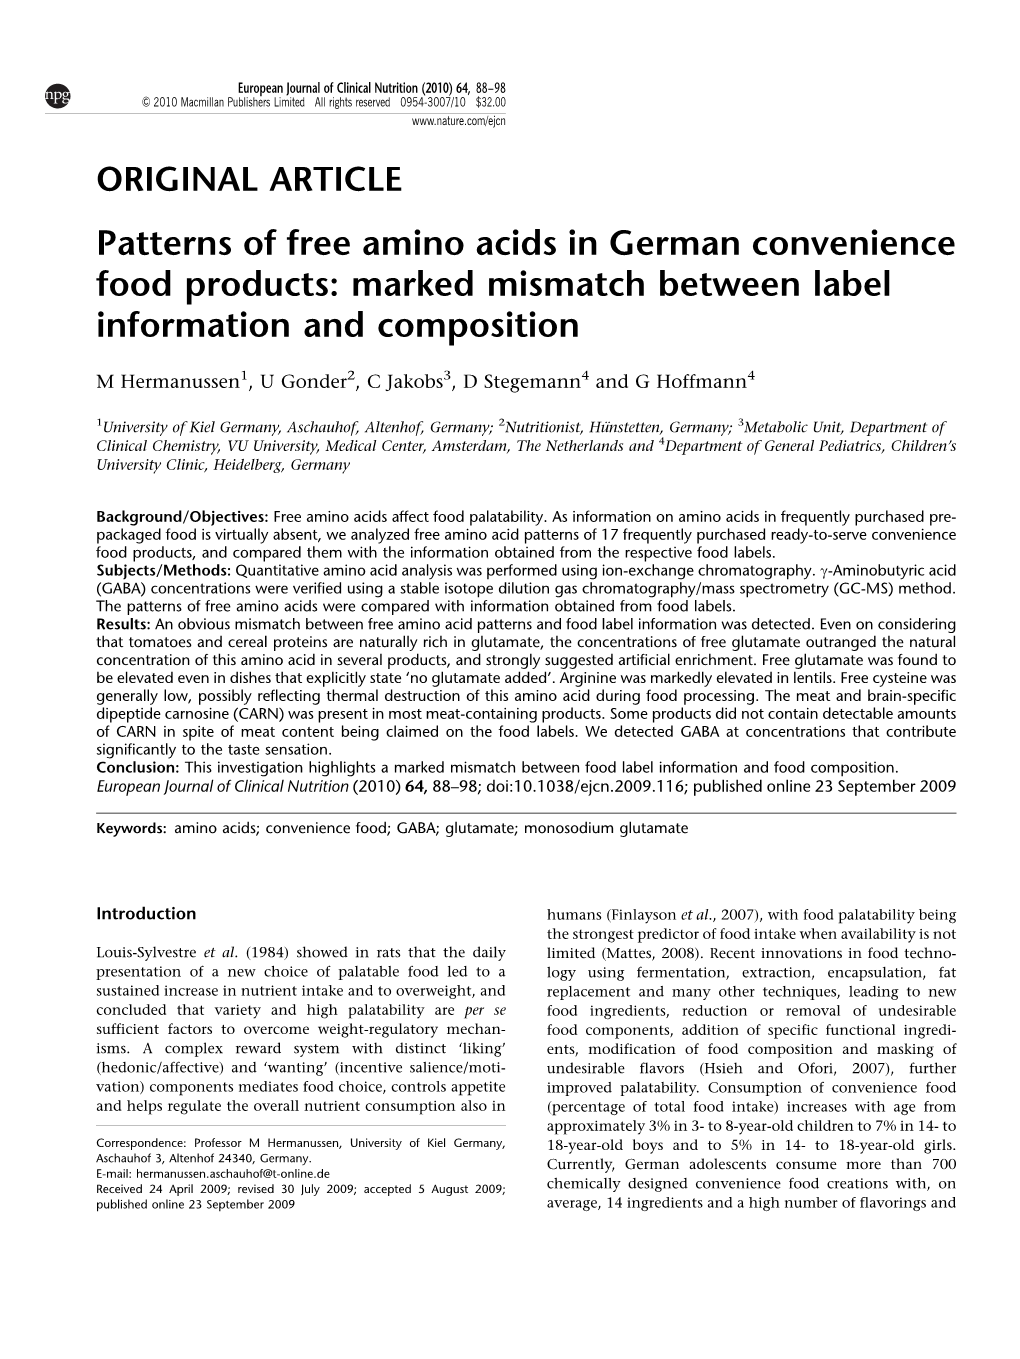 Patterns of Free Amino Acids in German Convenience Food Products: Marked Mismatch Between Label Information and Composition